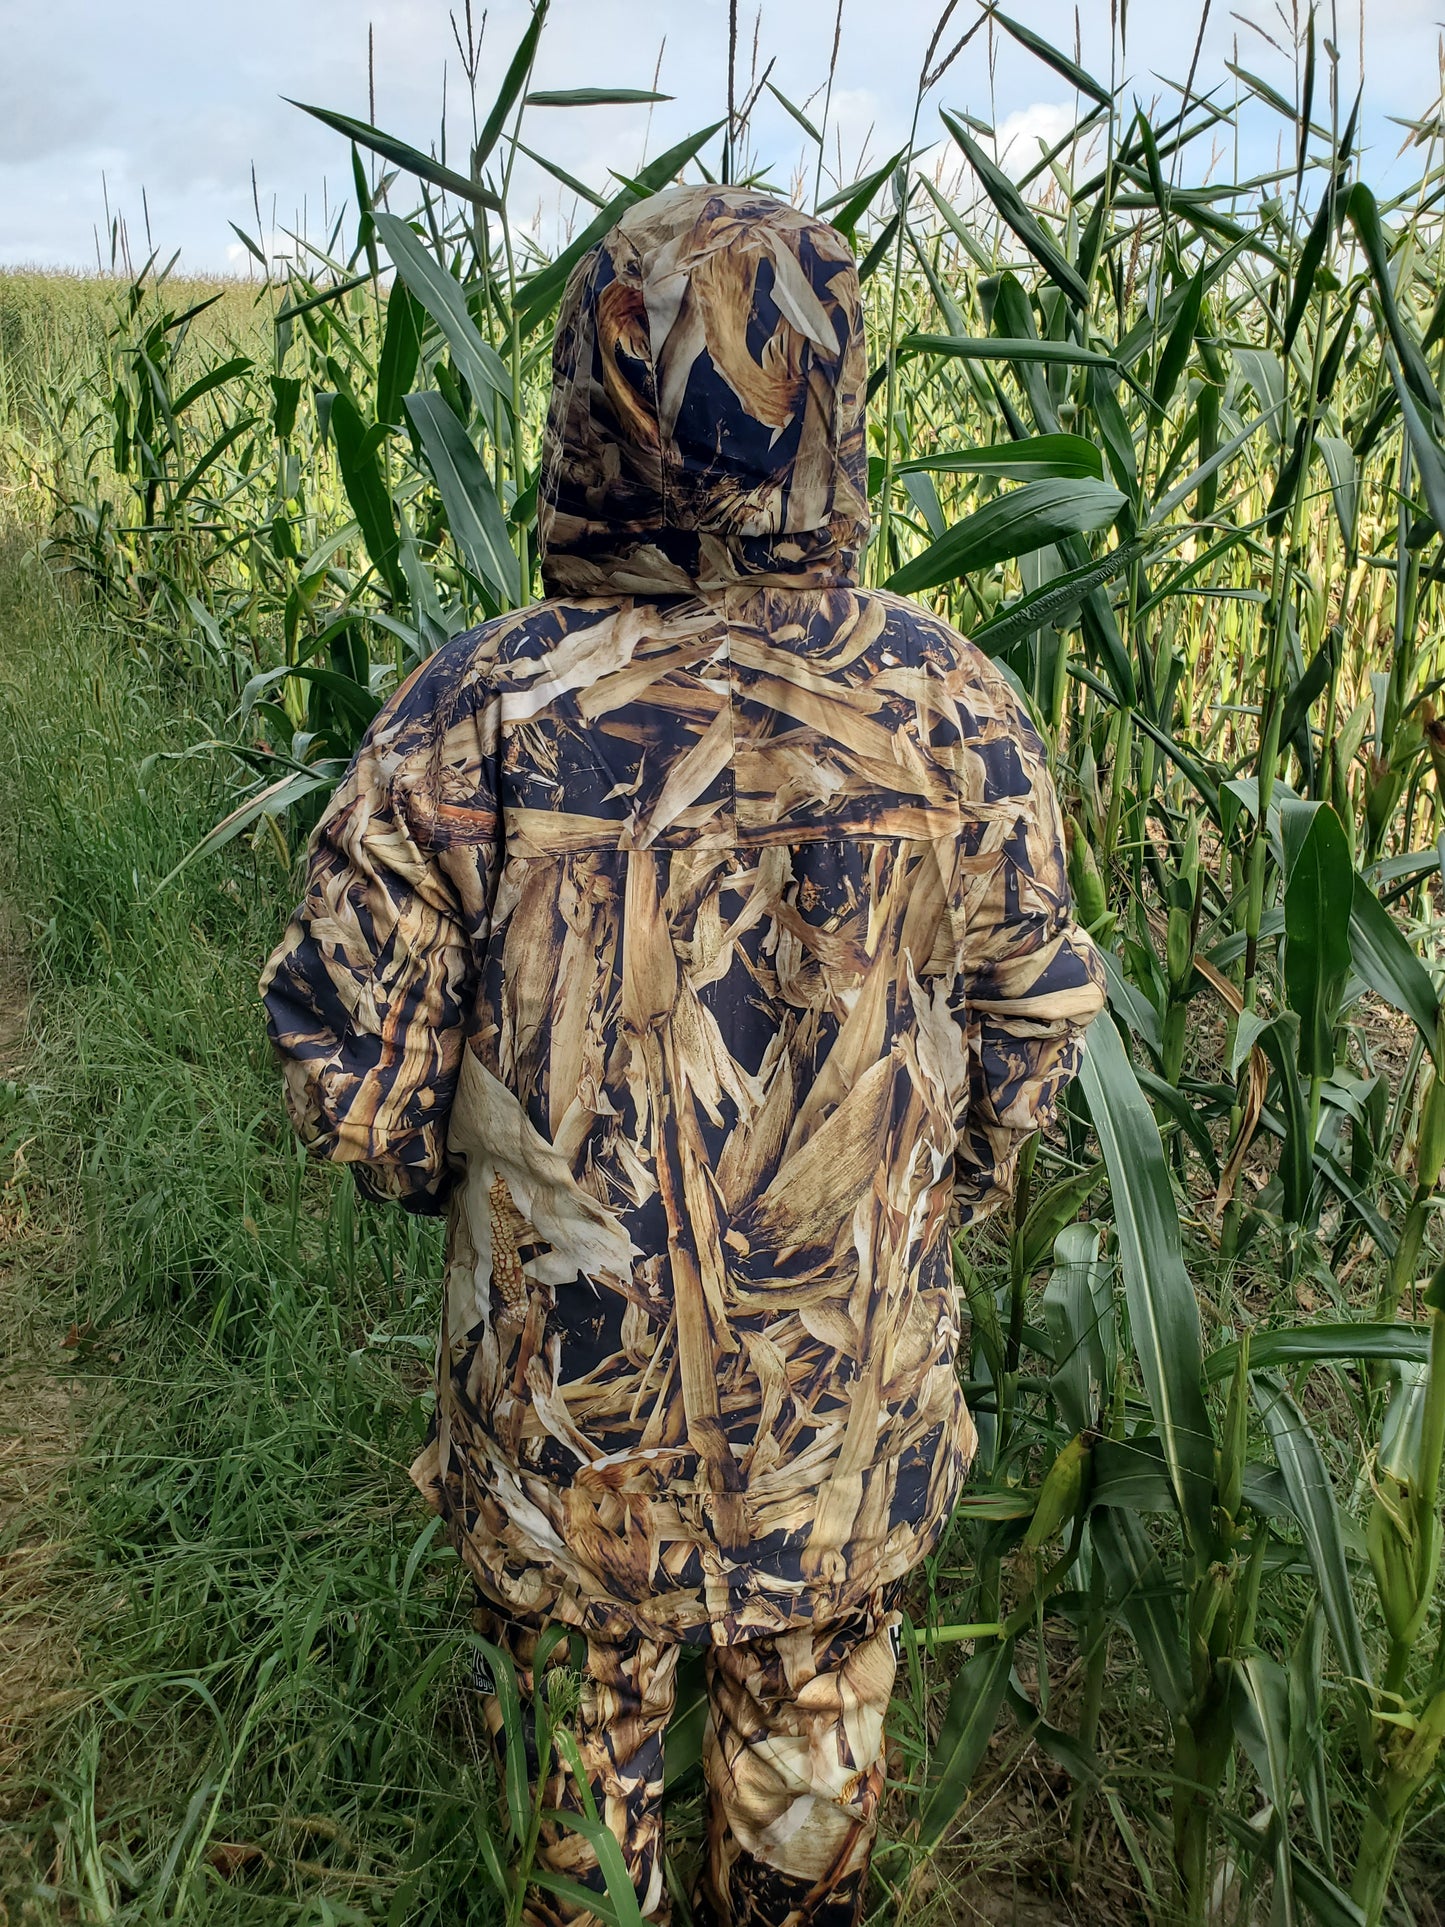 CLEARANCE - FALL CORN STALK - "HELL YES! Series" - Water Resistant, Mid-weight Jacket